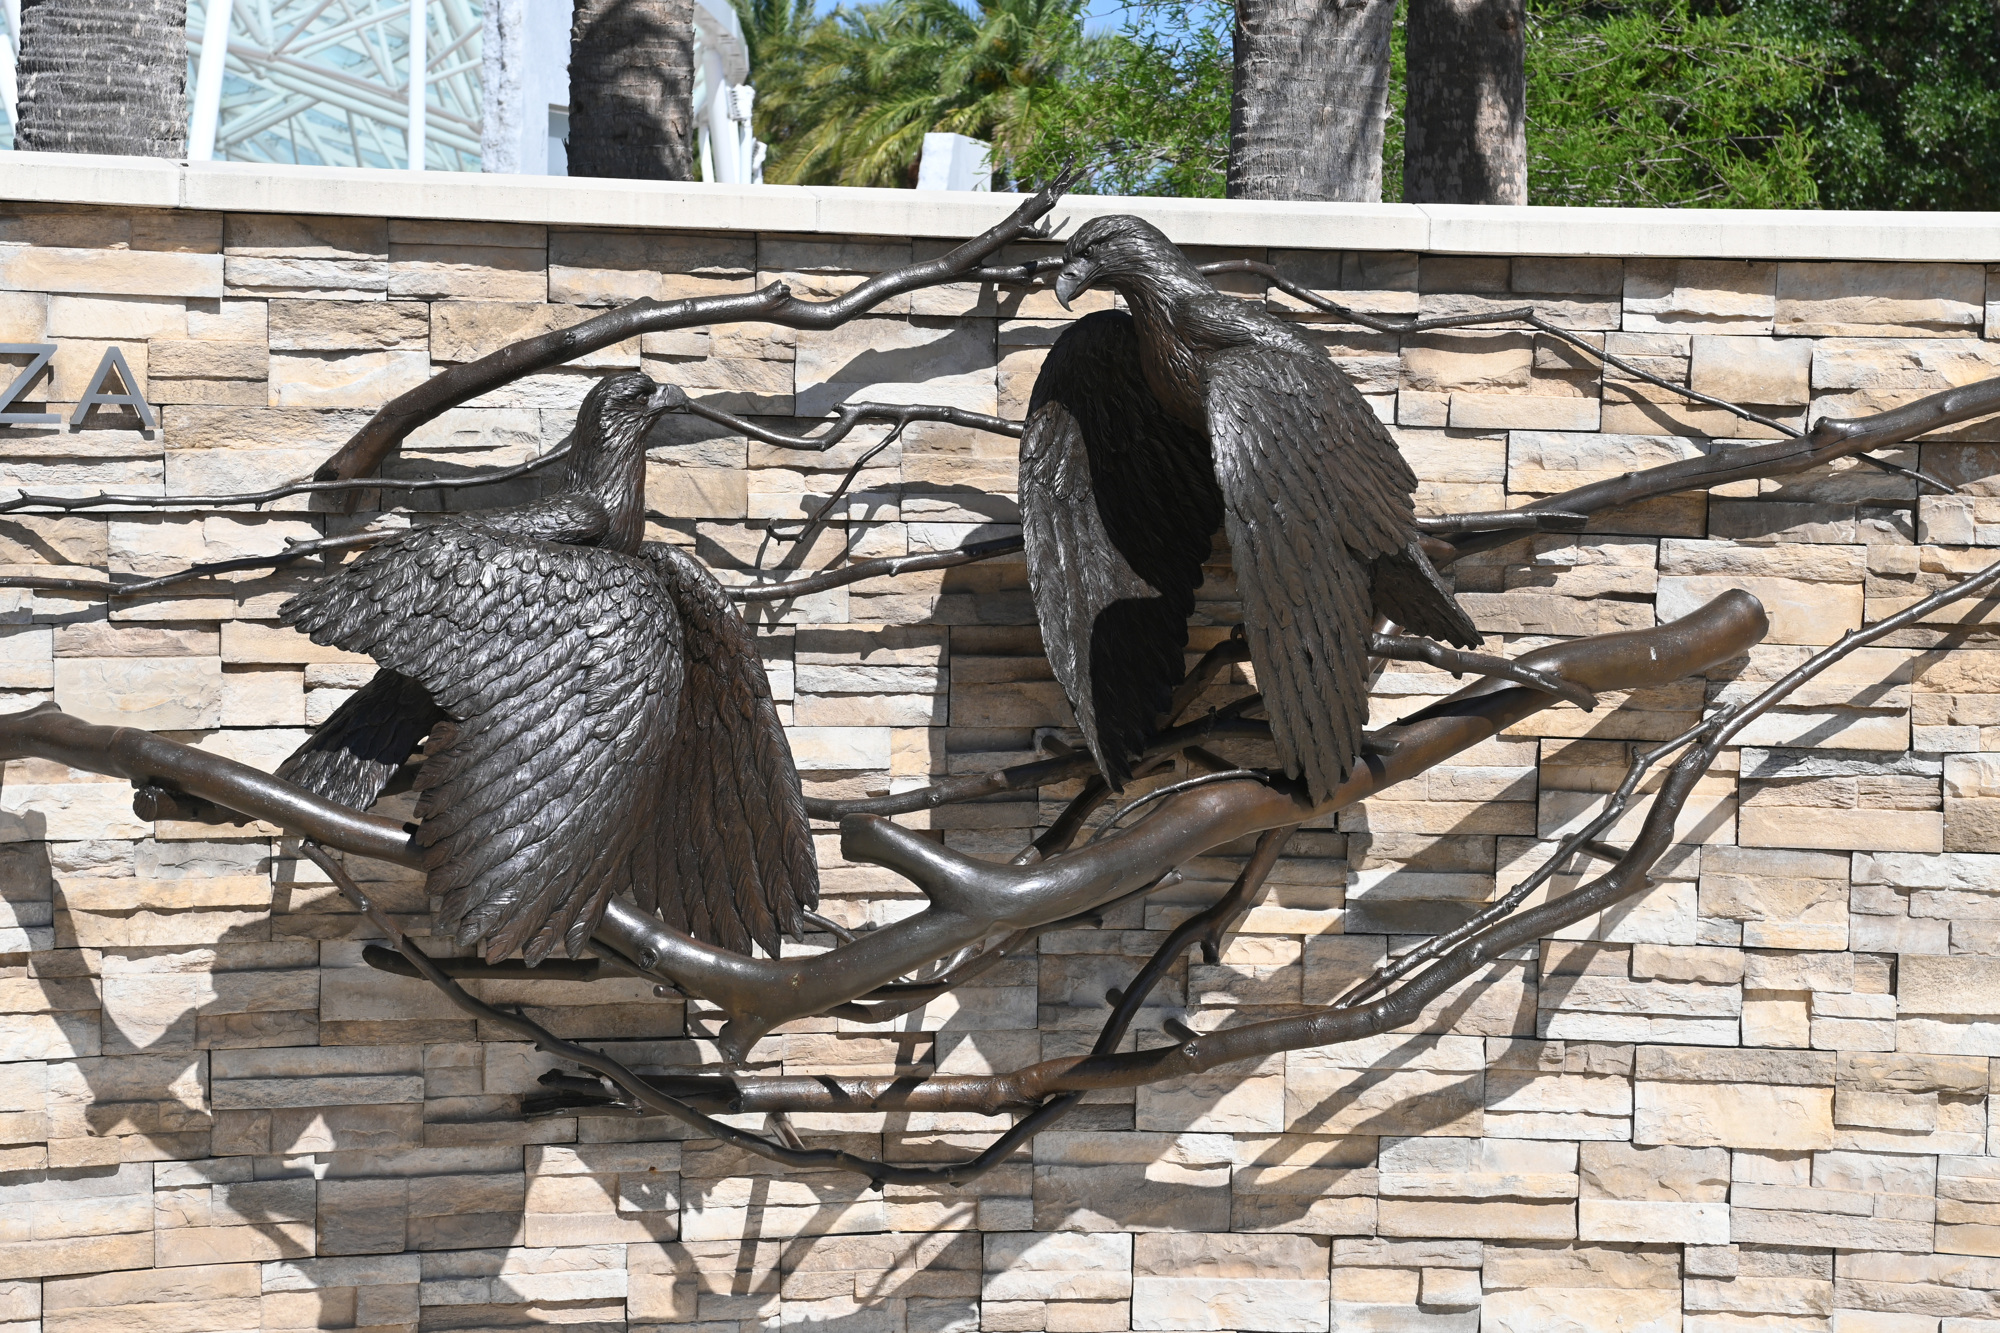 These two eagles are part of the Home sculpture at Patriot Plaza. (Photo: Spencer Fordin)